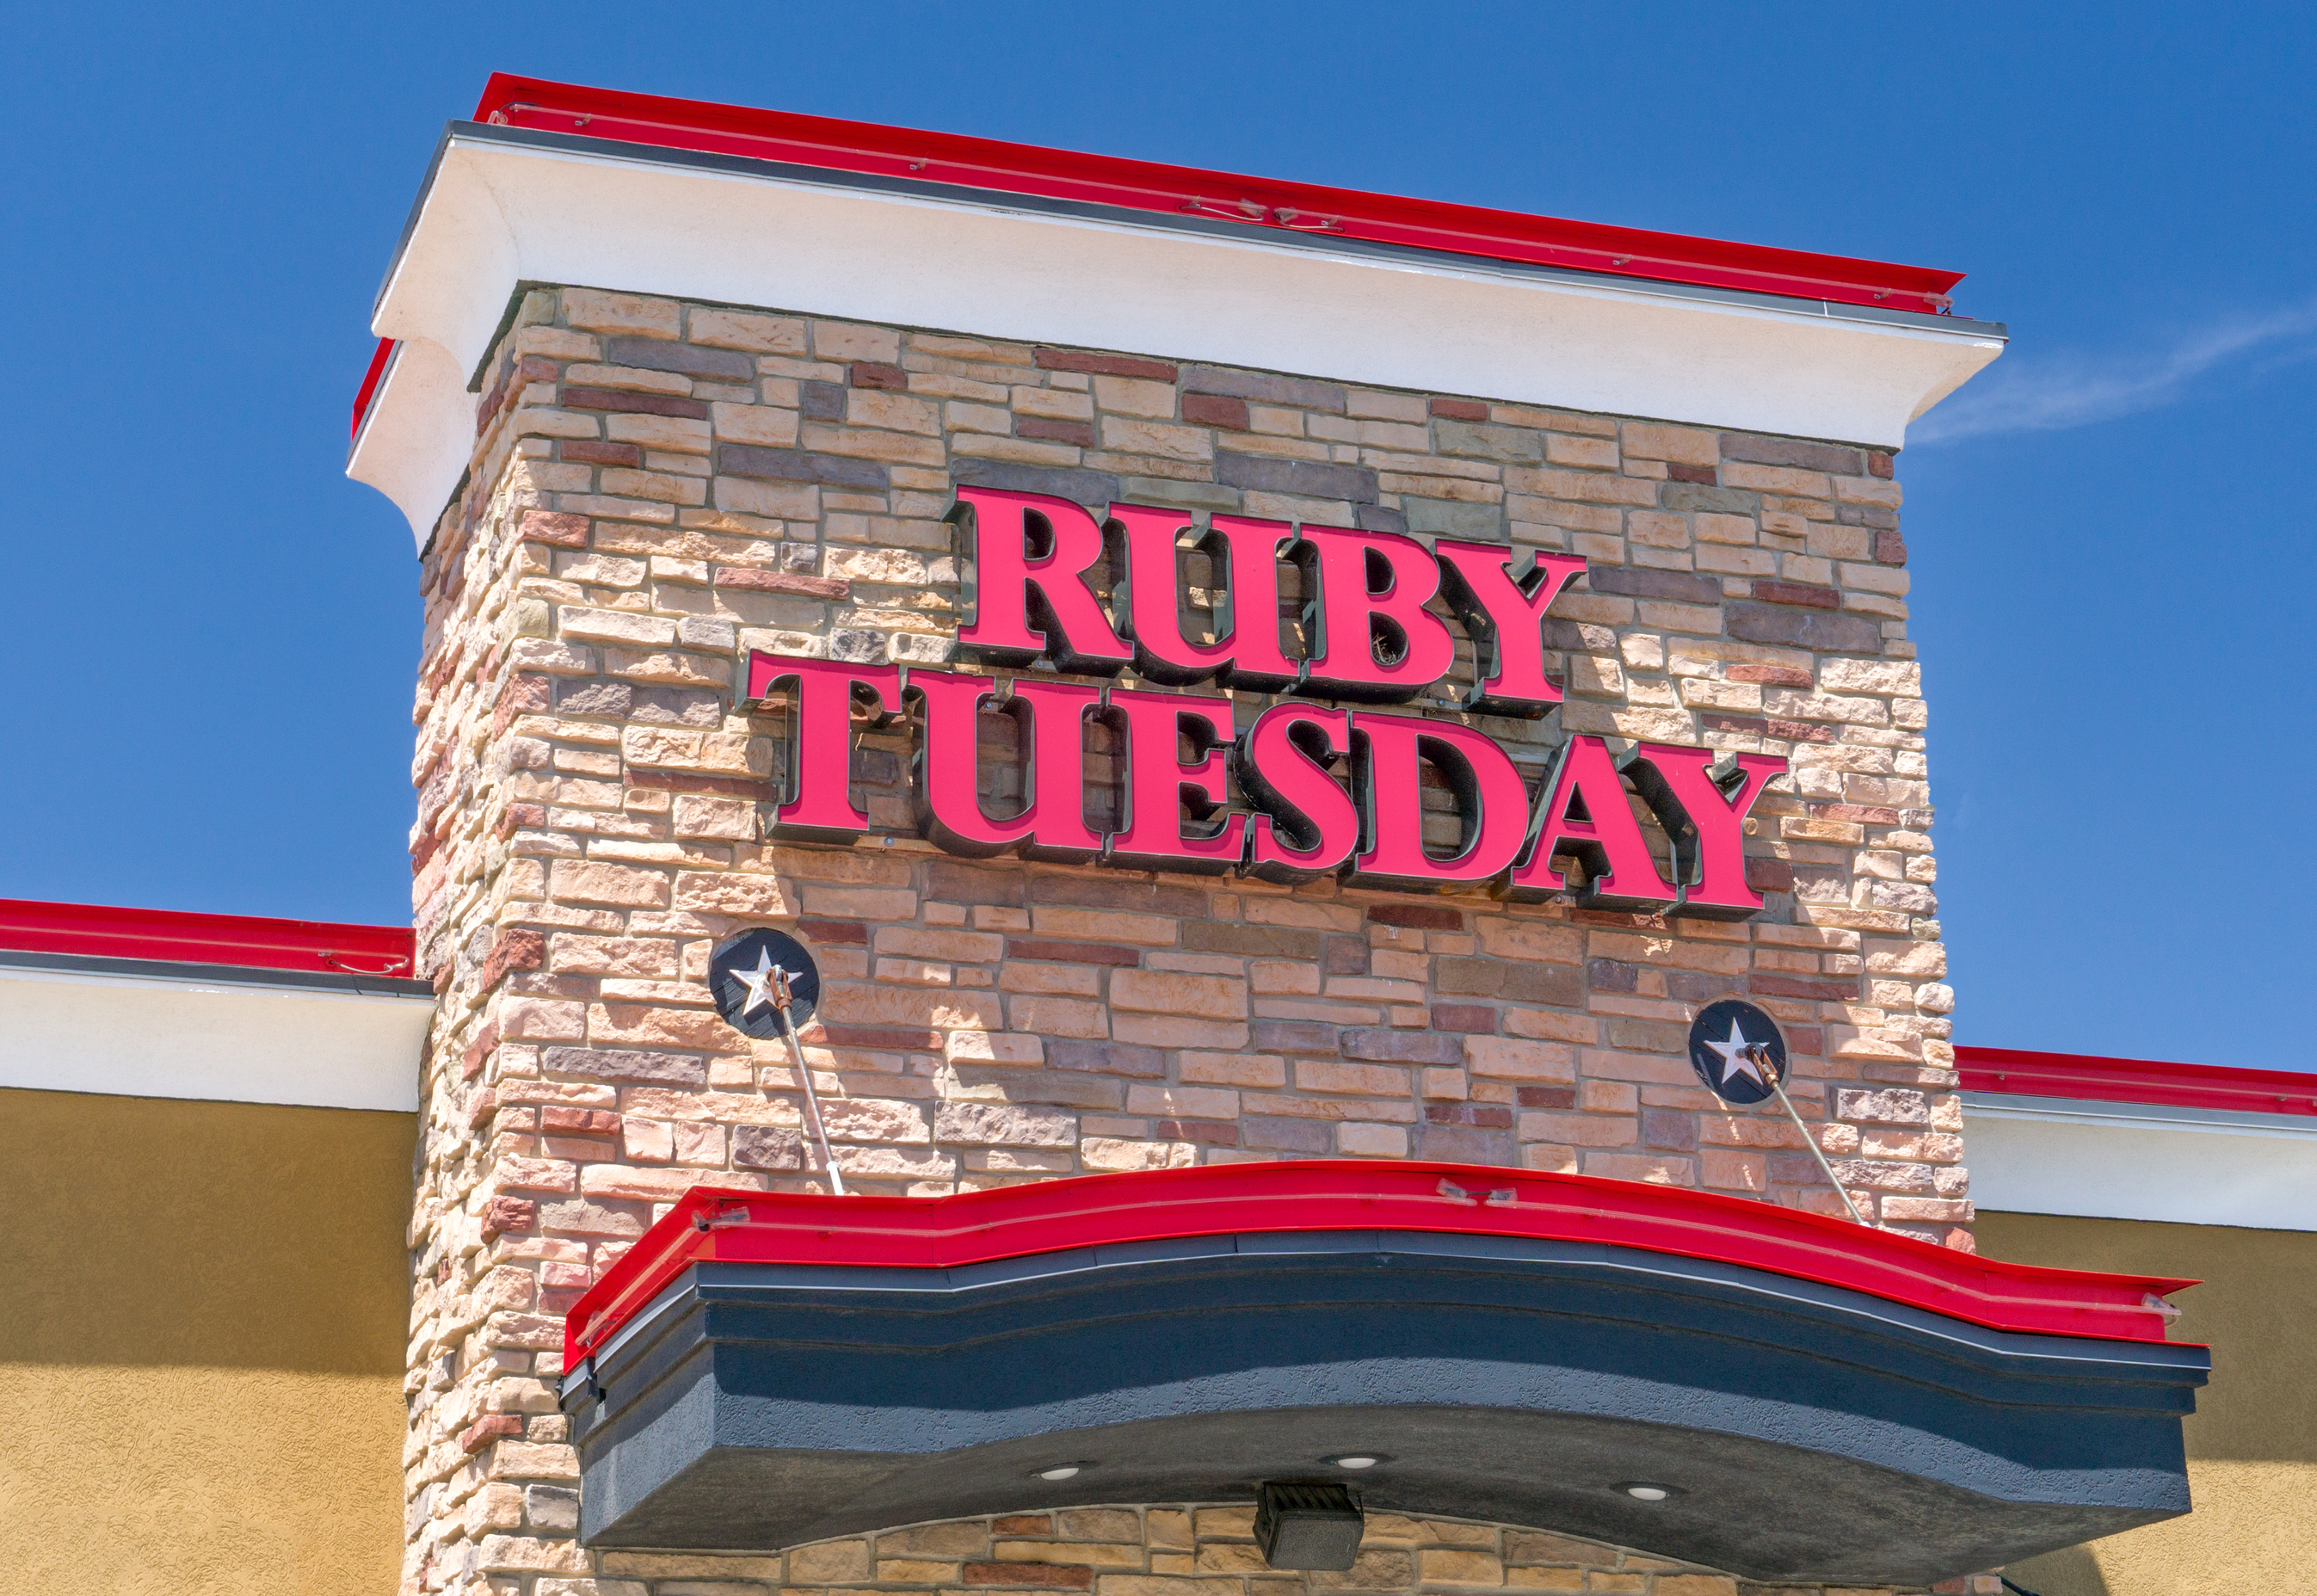 Ends today! Ruby Tuesday: FREE Burger or Garden Bar & lemonade with email entry